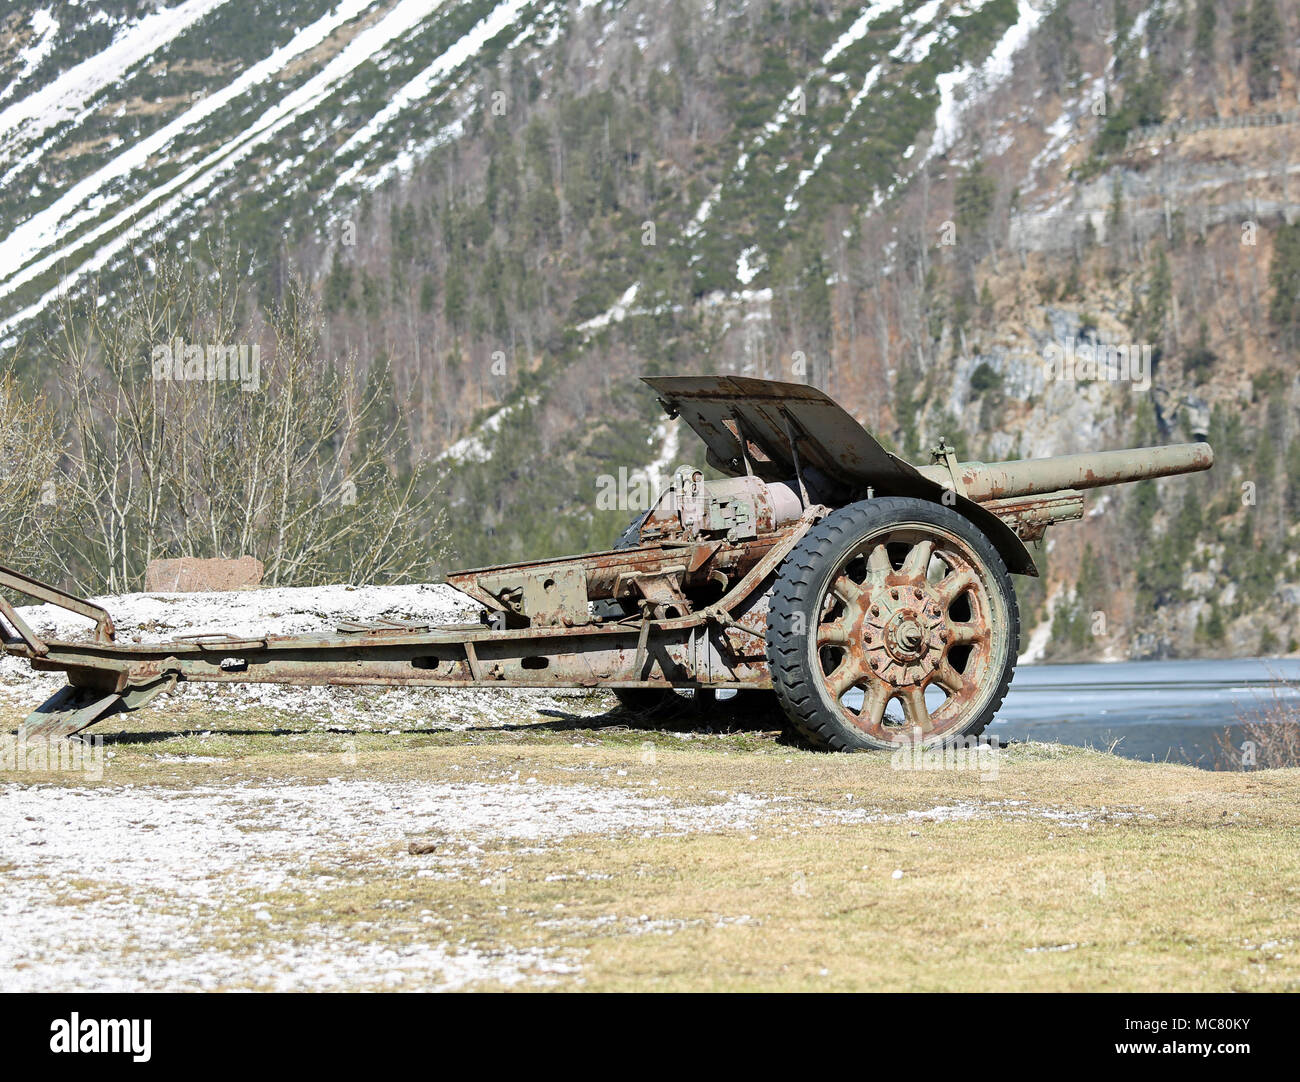 Tarvisio, UD, Italy - April 1, 2018: Old Cannon of first wolrd war Stock Photo